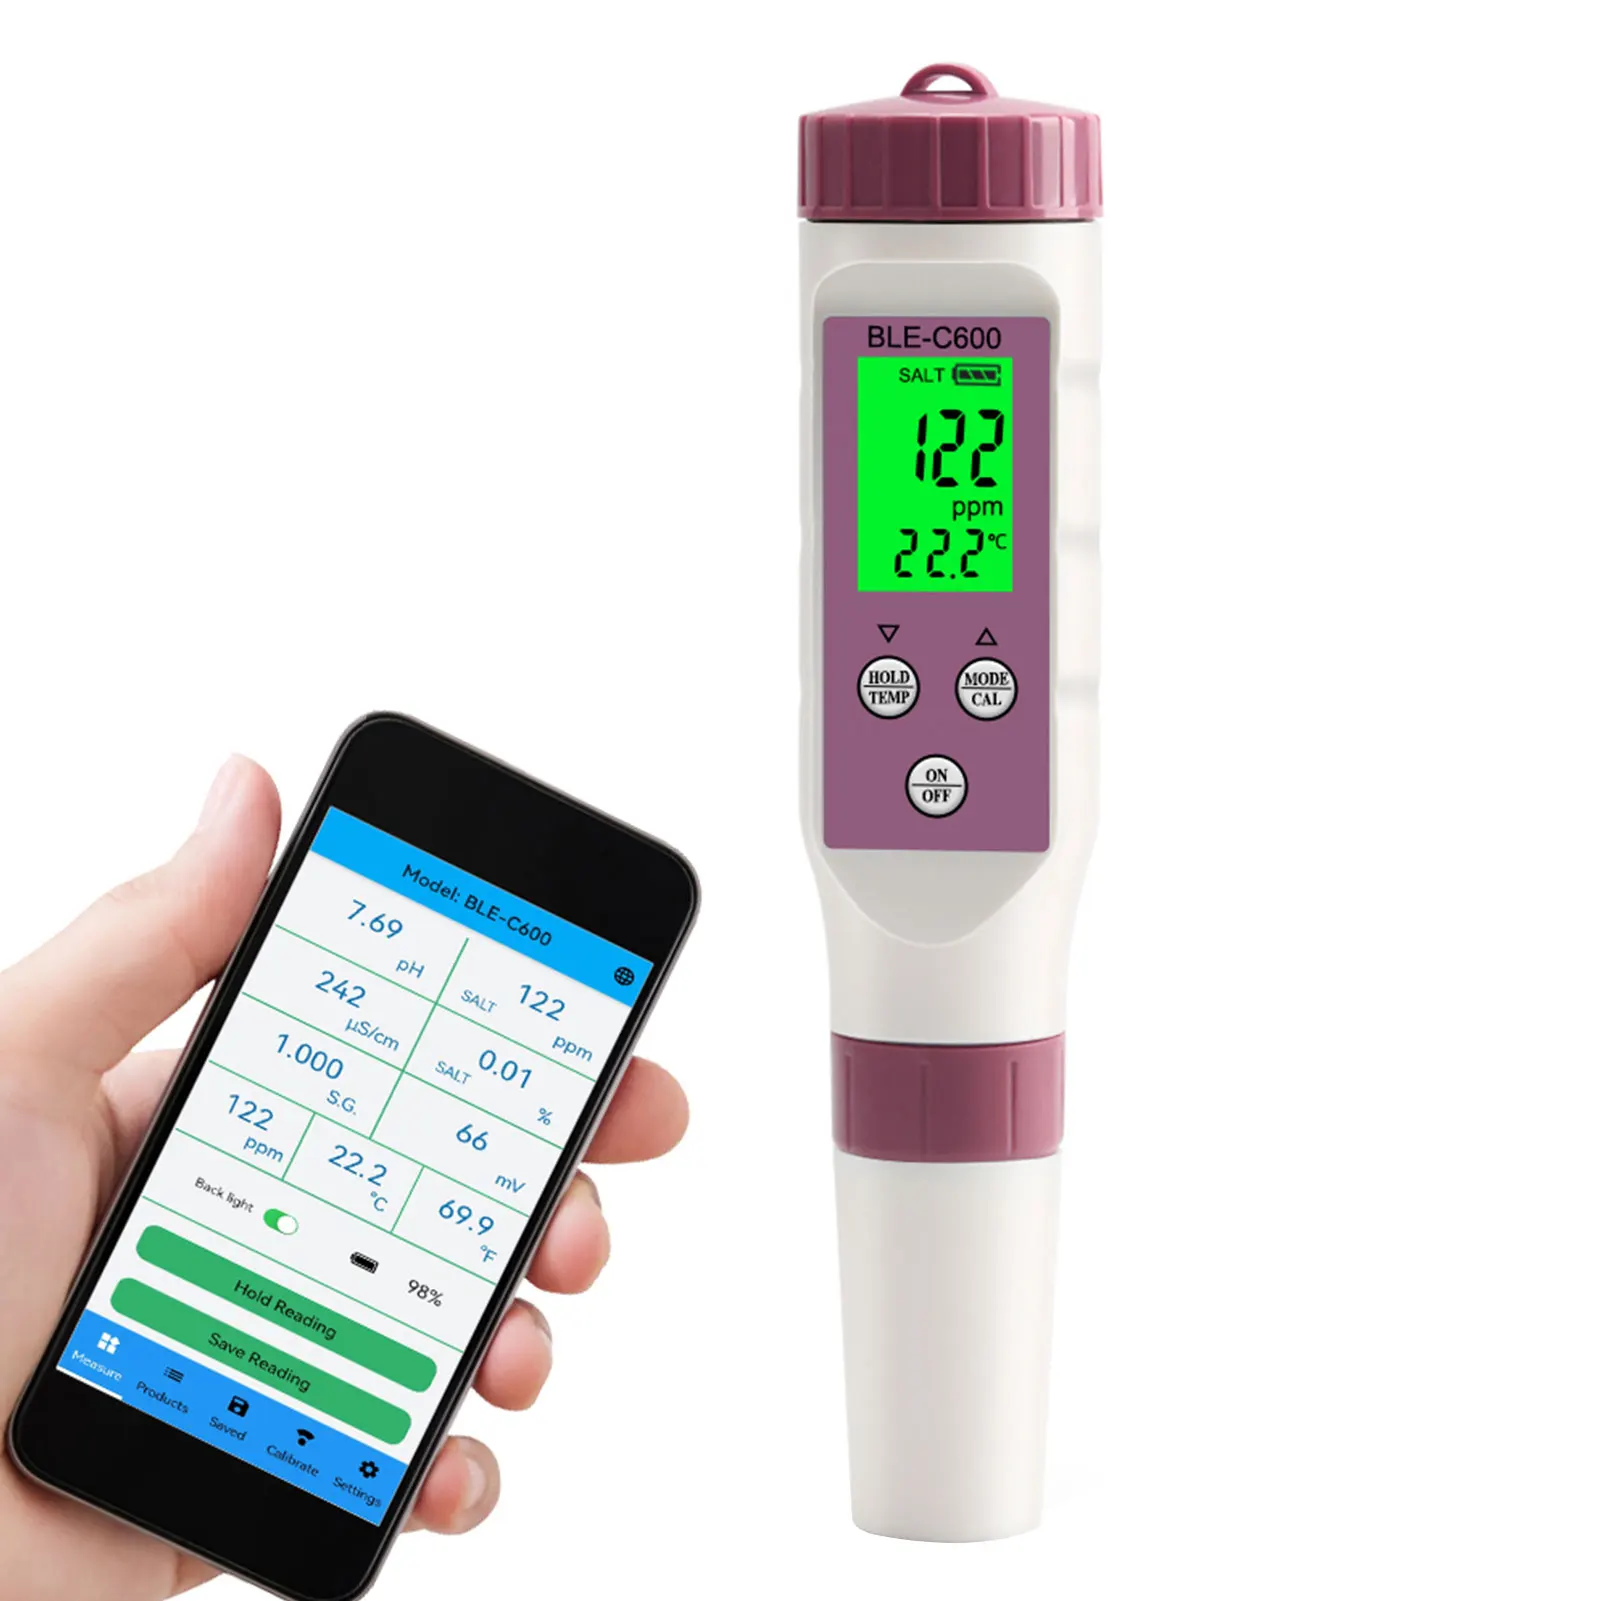 

7 in 1 Smart Water Quality Detector Digital Drinking Water Tester Pen Salinity Meter PH/TDS/EC/ORP/SG/SALT/TEMP for Well Water